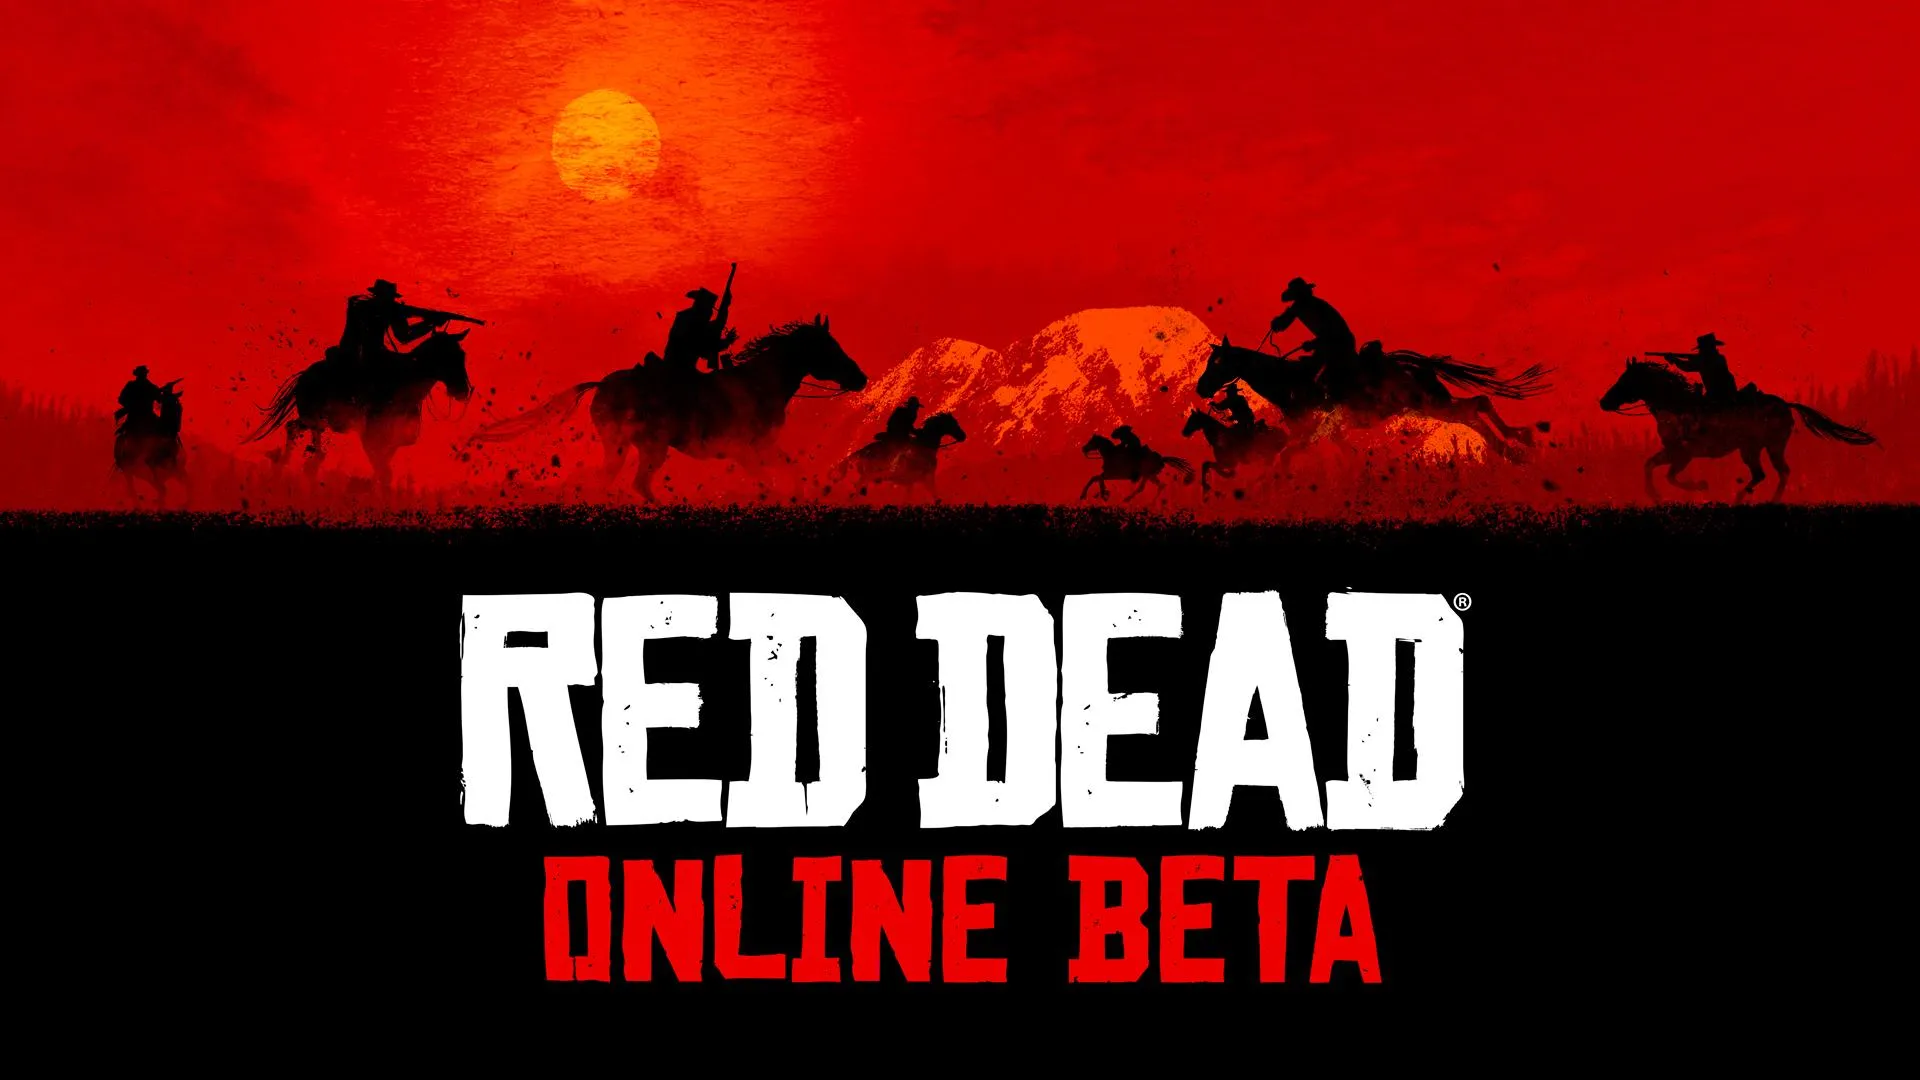 Red Dead Online Beta Early Access Begins Tomorrow, November 27!